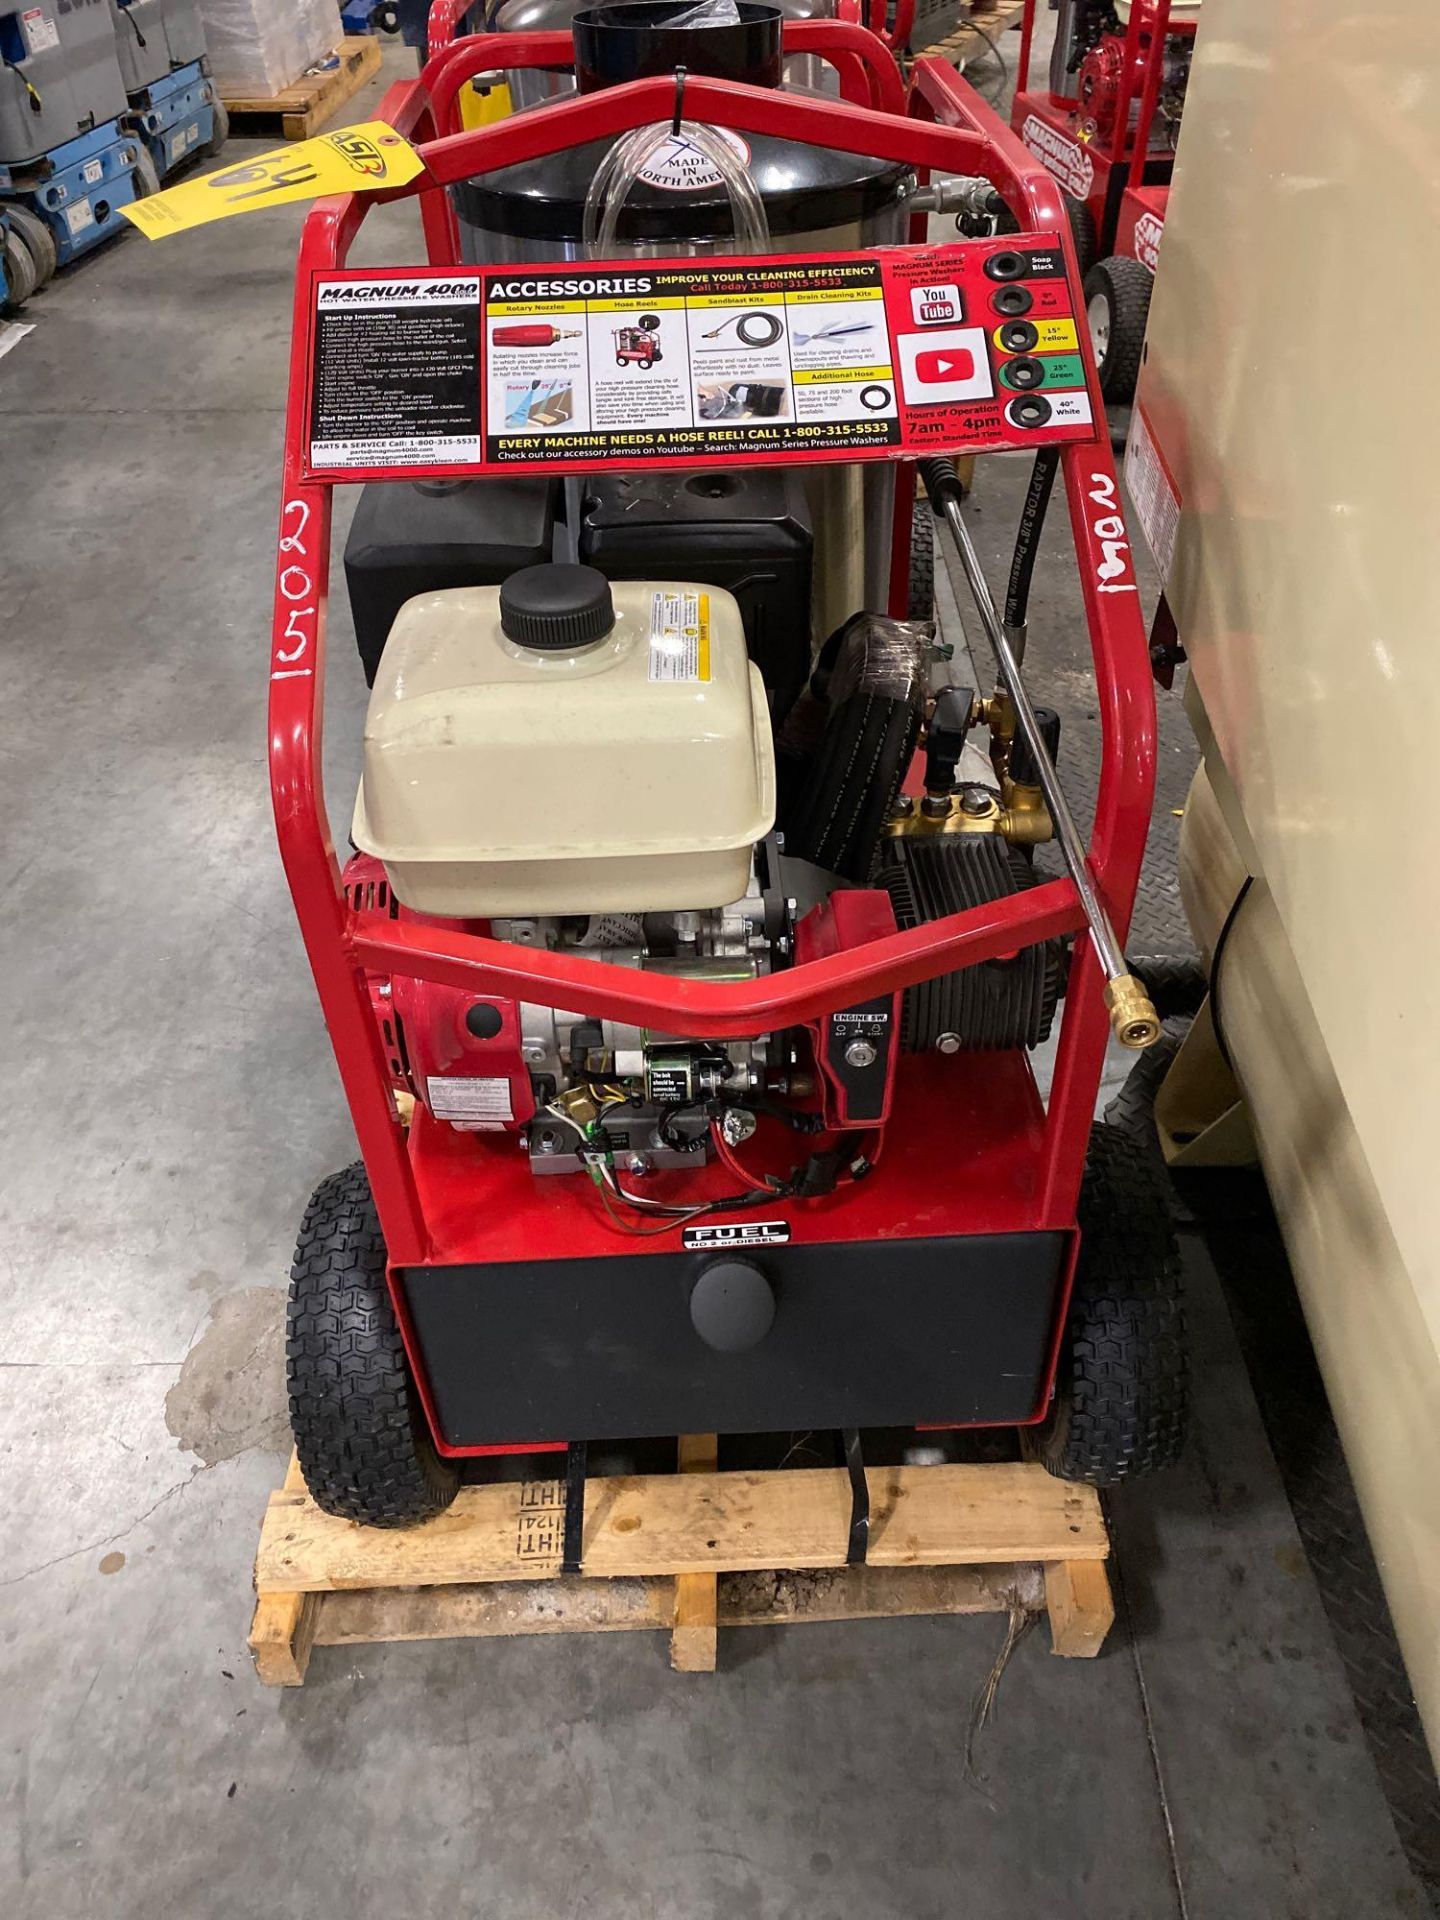 NEW 2019 MAGNUM 4000 PSI HEATED PRESSURE WASHER, ELECTRIC START, GAS POWERED WITH DIESEL BURNER, HOS - Image 2 of 5